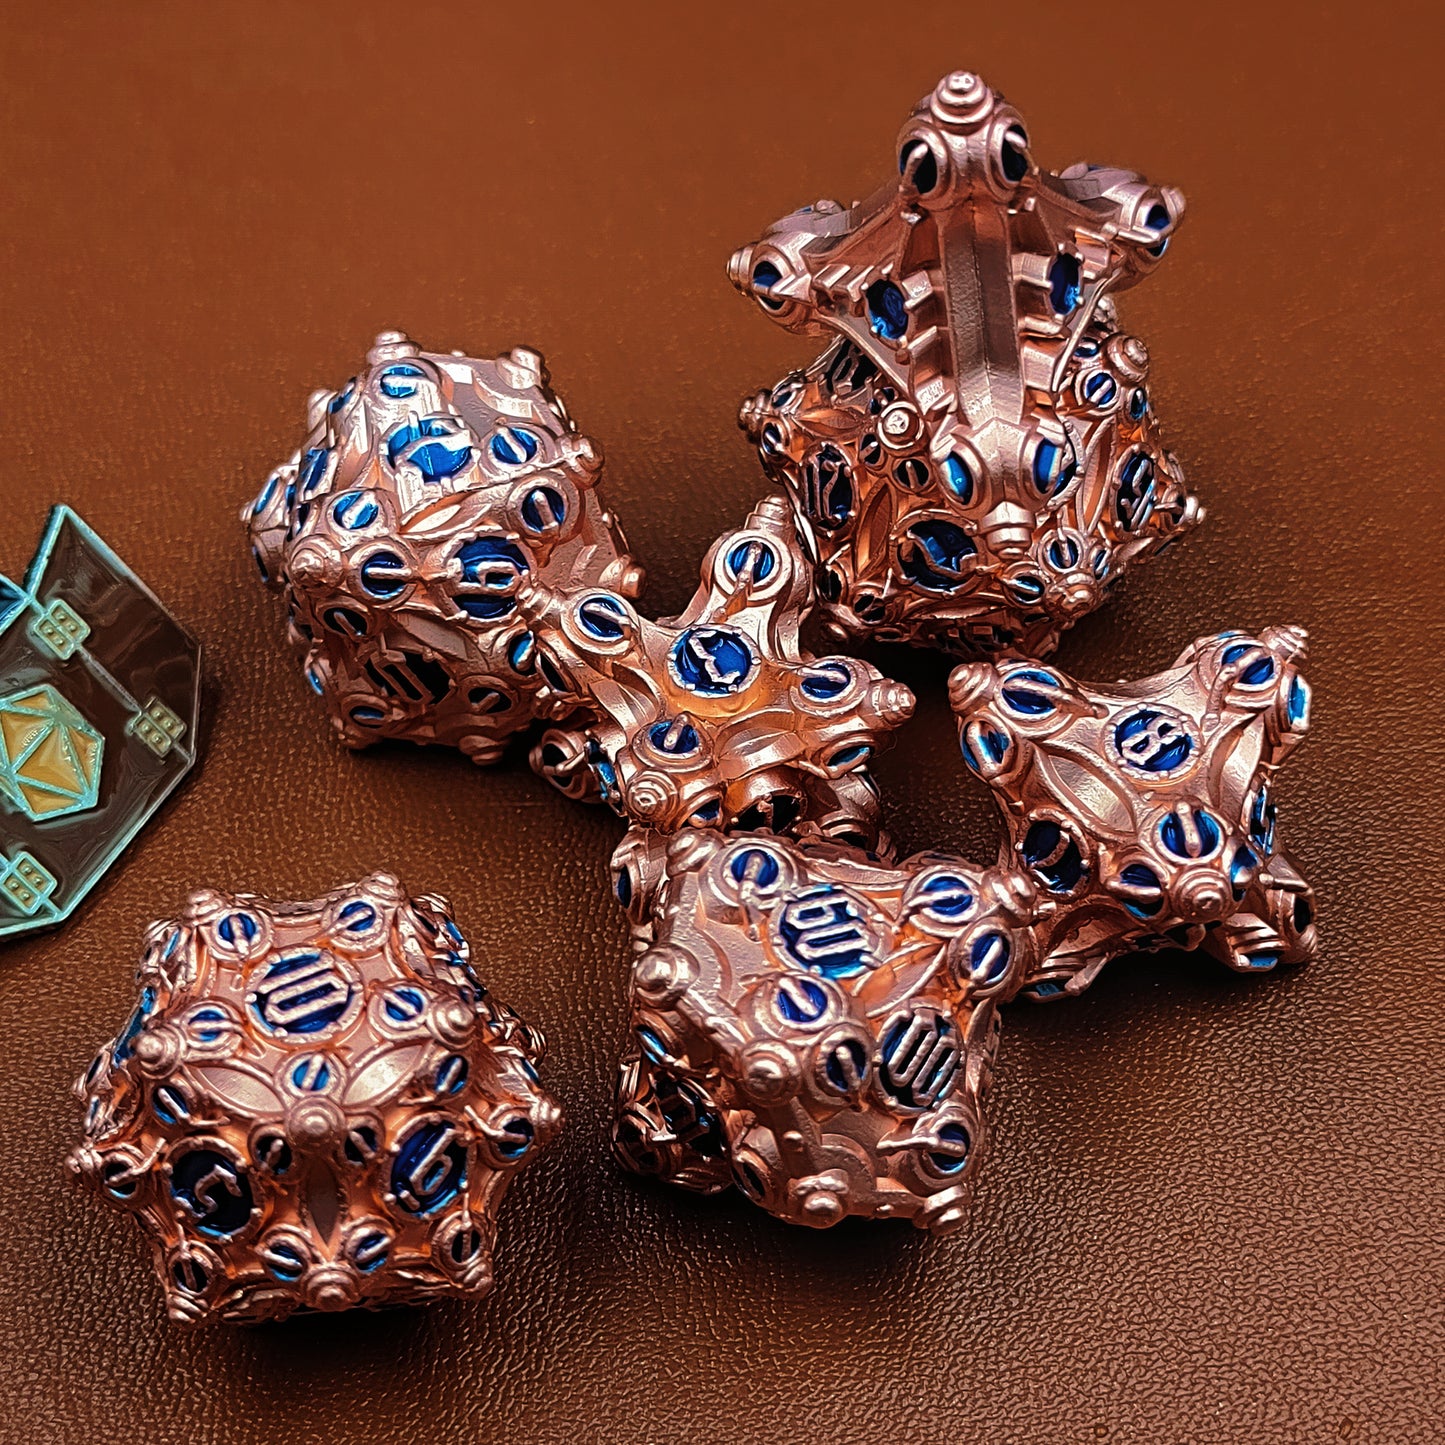 FREE Today: Pink Engine Metal Dice (Give away a random dice set)